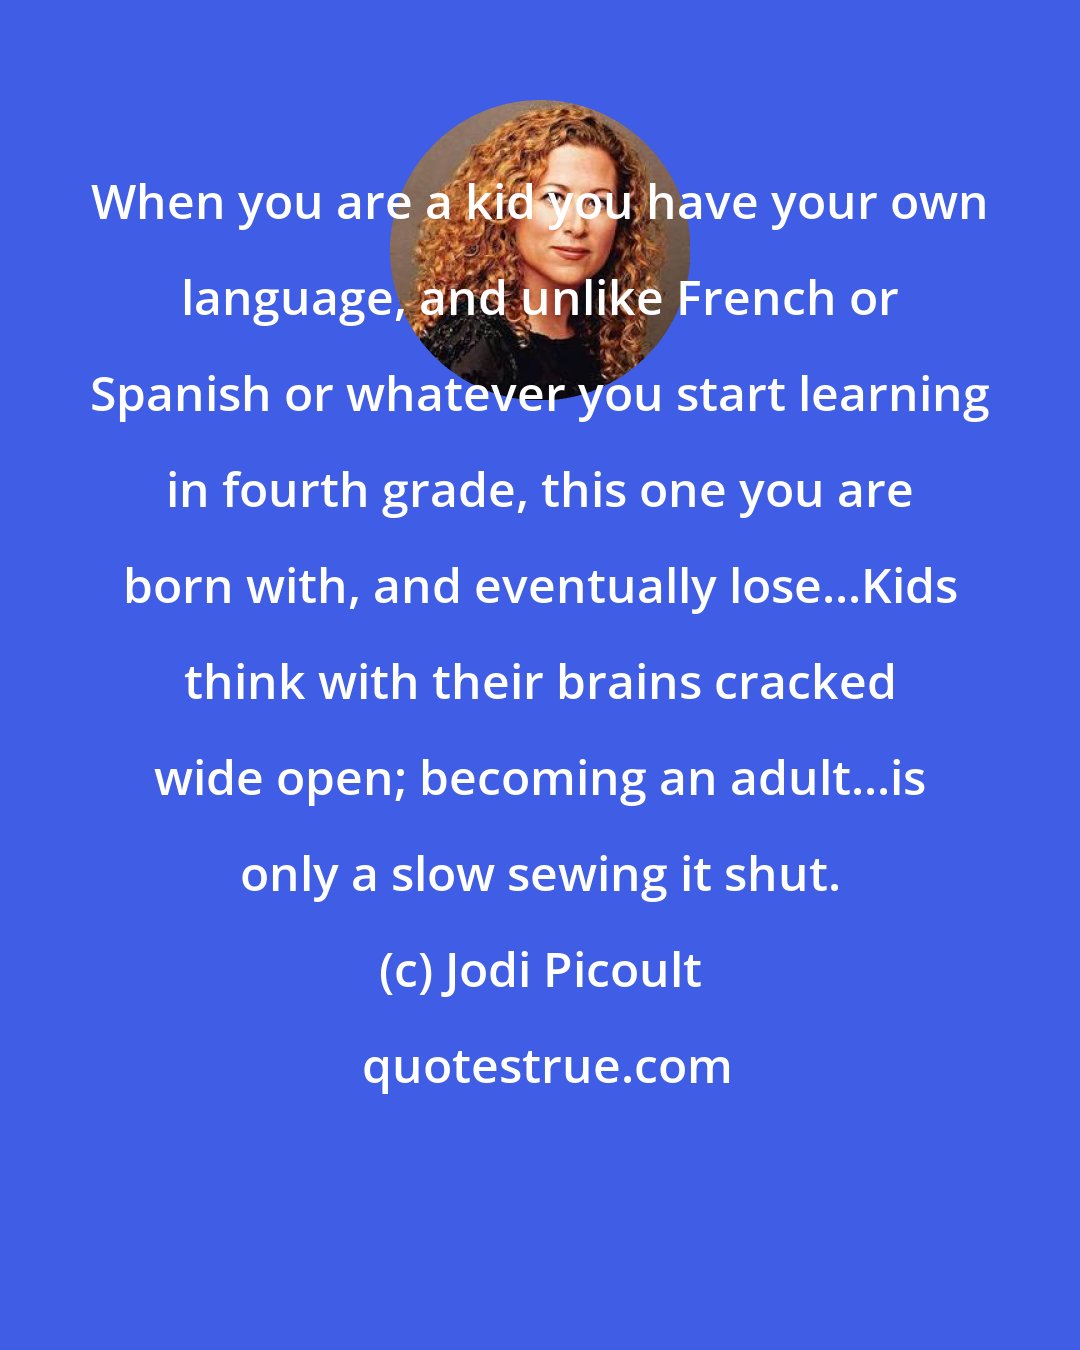 Jodi Picoult: When you are a kid you have your own language, and unlike French or Spanish or whatever you start learning in fourth grade, this one you are born with, and eventually lose...Kids think with their brains cracked wide open; becoming an adult...is only a slow sewing it shut.